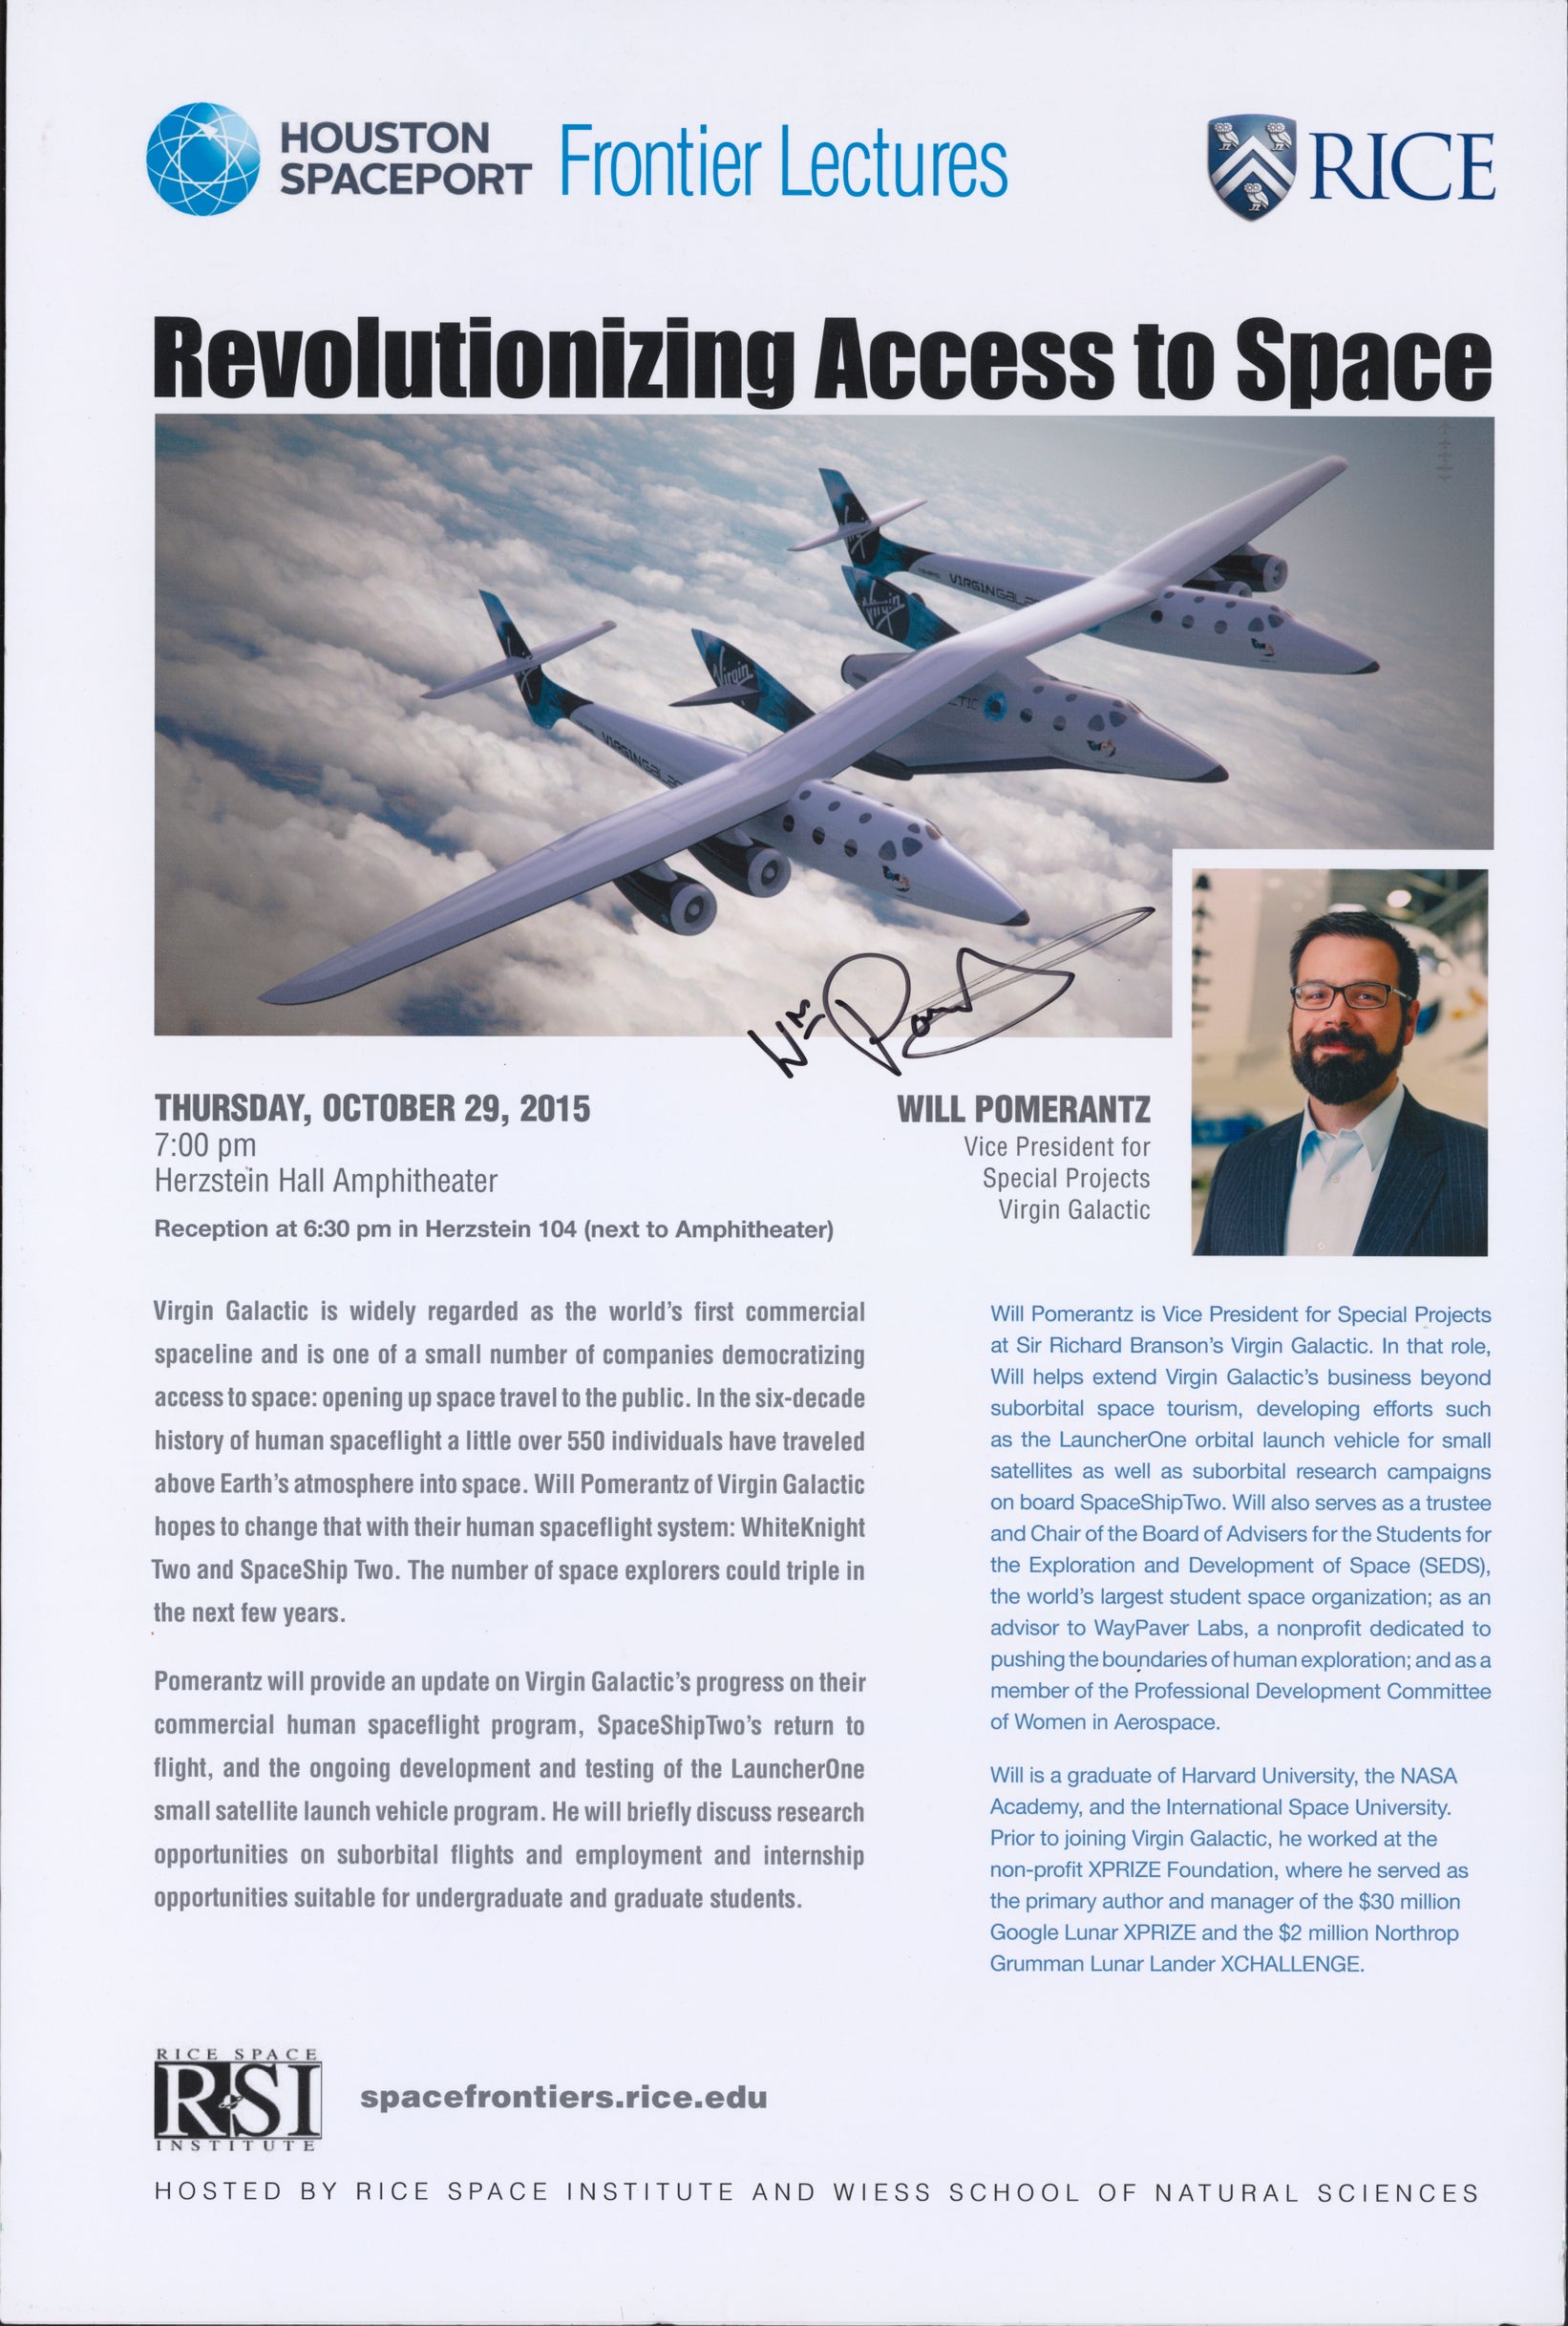 Poster of "Revolutionizing Access to Space" by Will Pomerantz